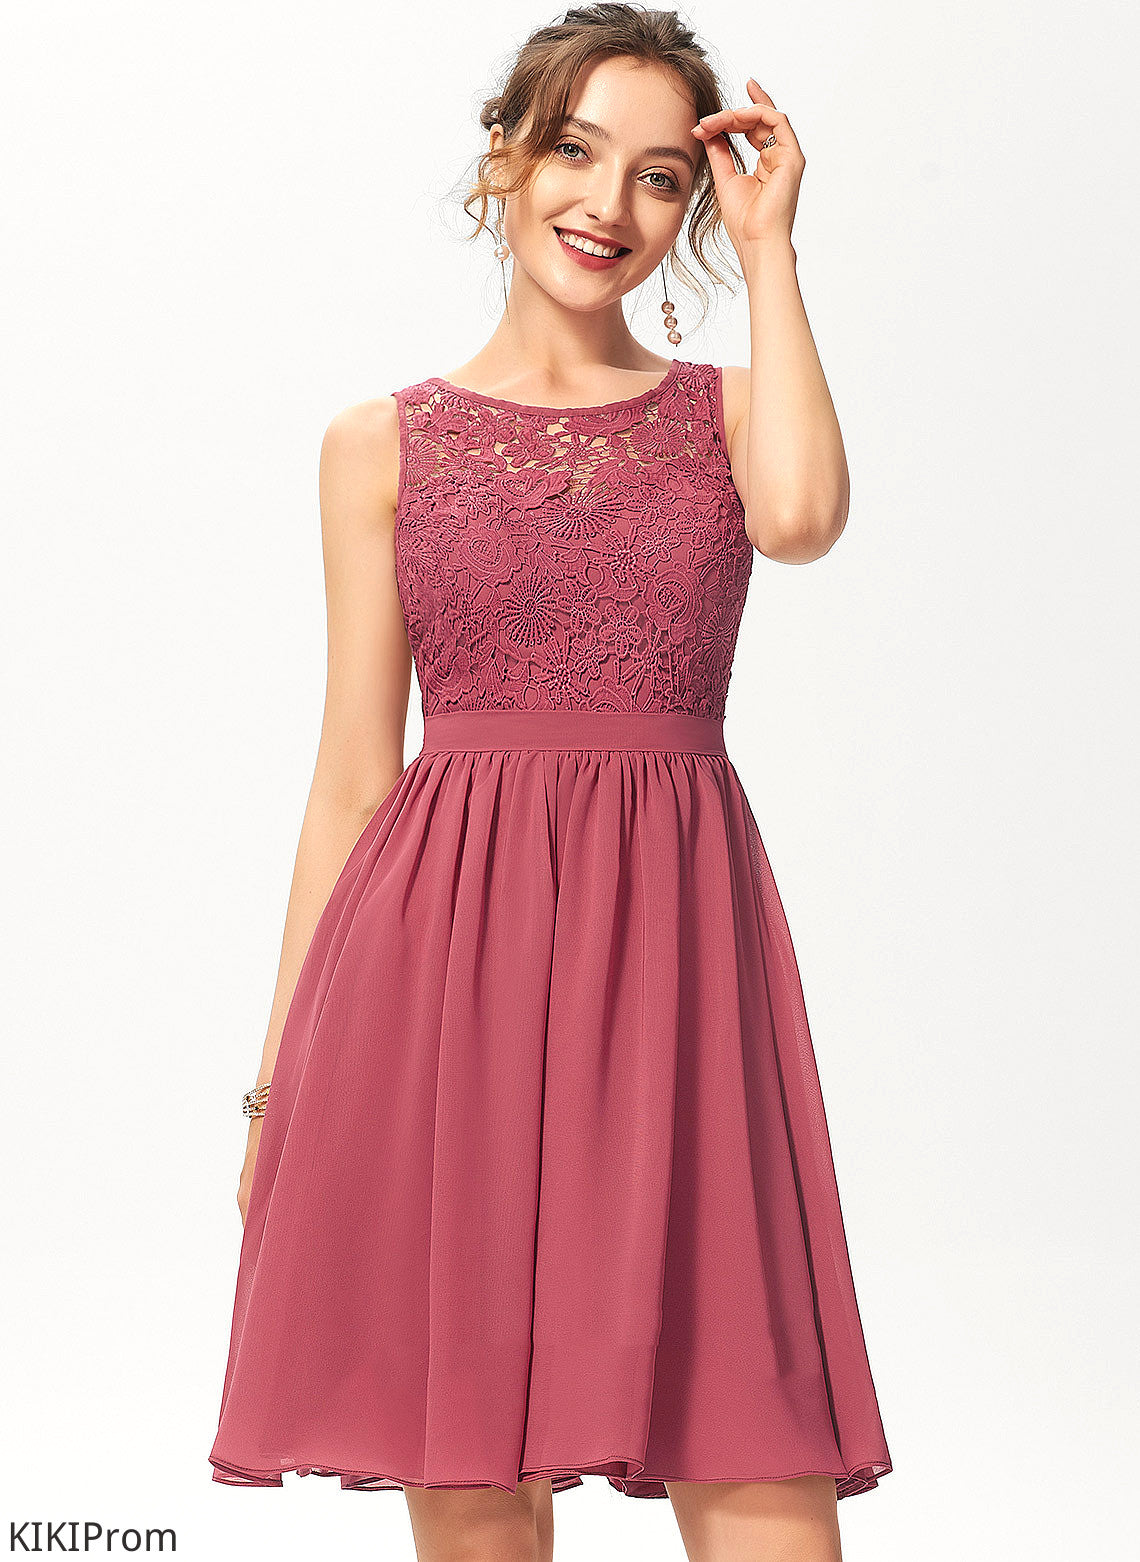 Cocktail Cocktail Dresses Neck A-Line Lace Scoop Dress Shayna Knee-Length Chiffon